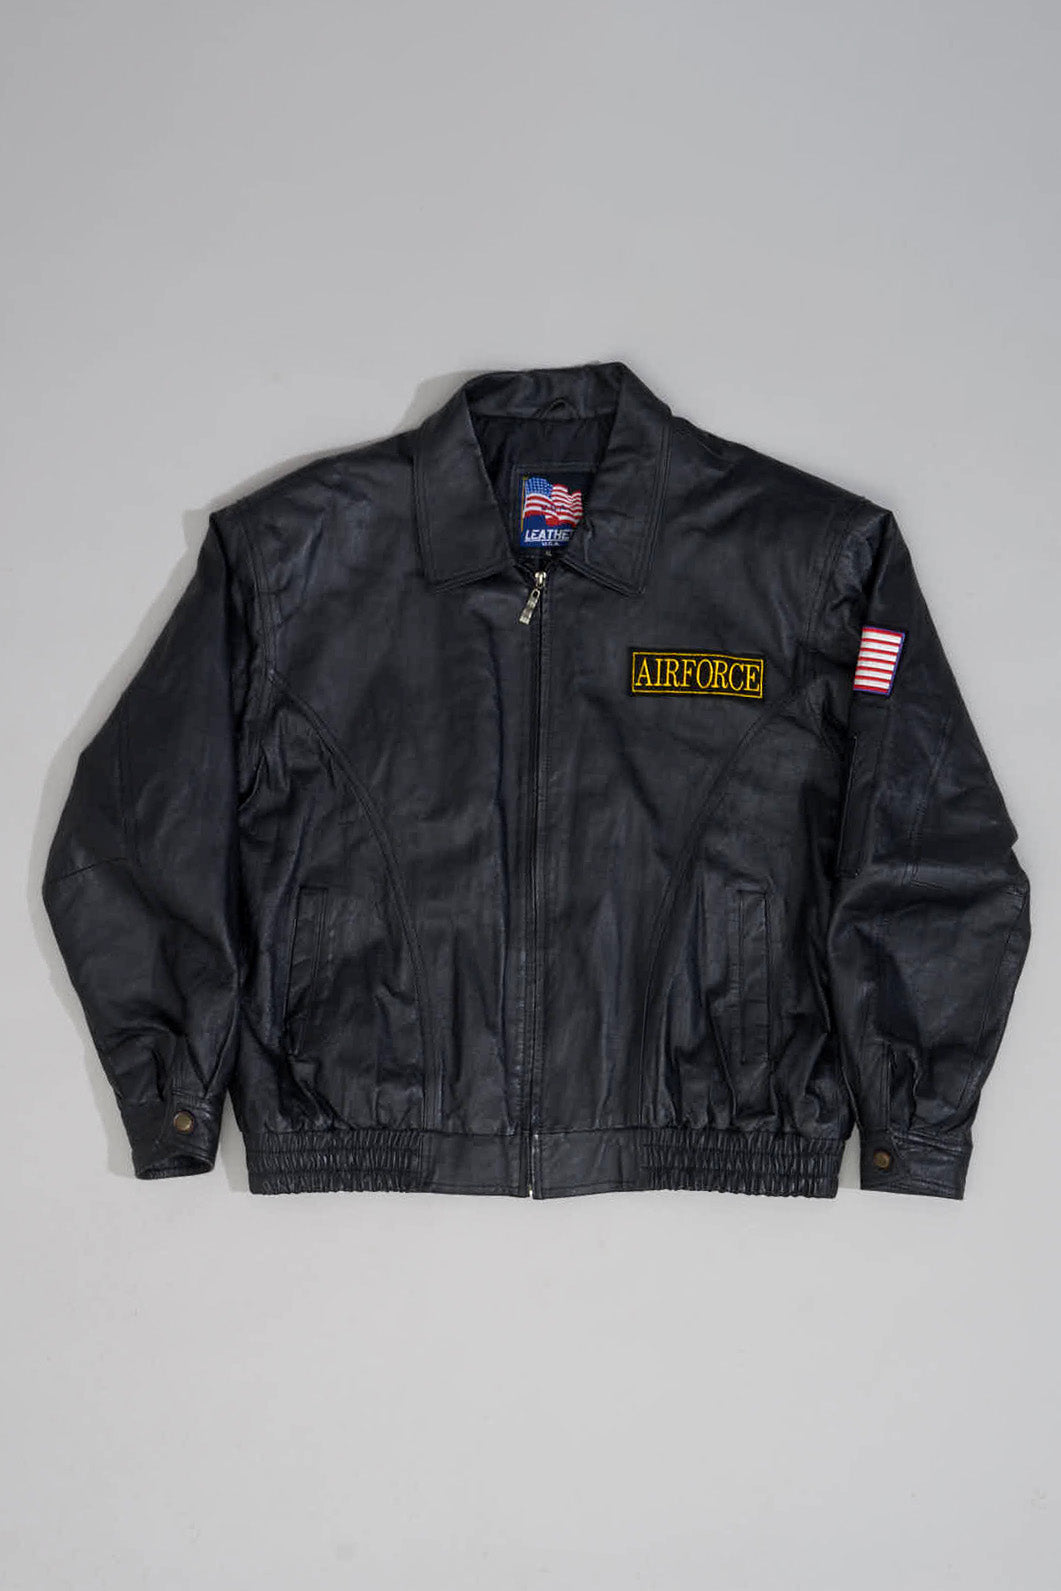 AIR FORCE LEATHER Bomber - XL